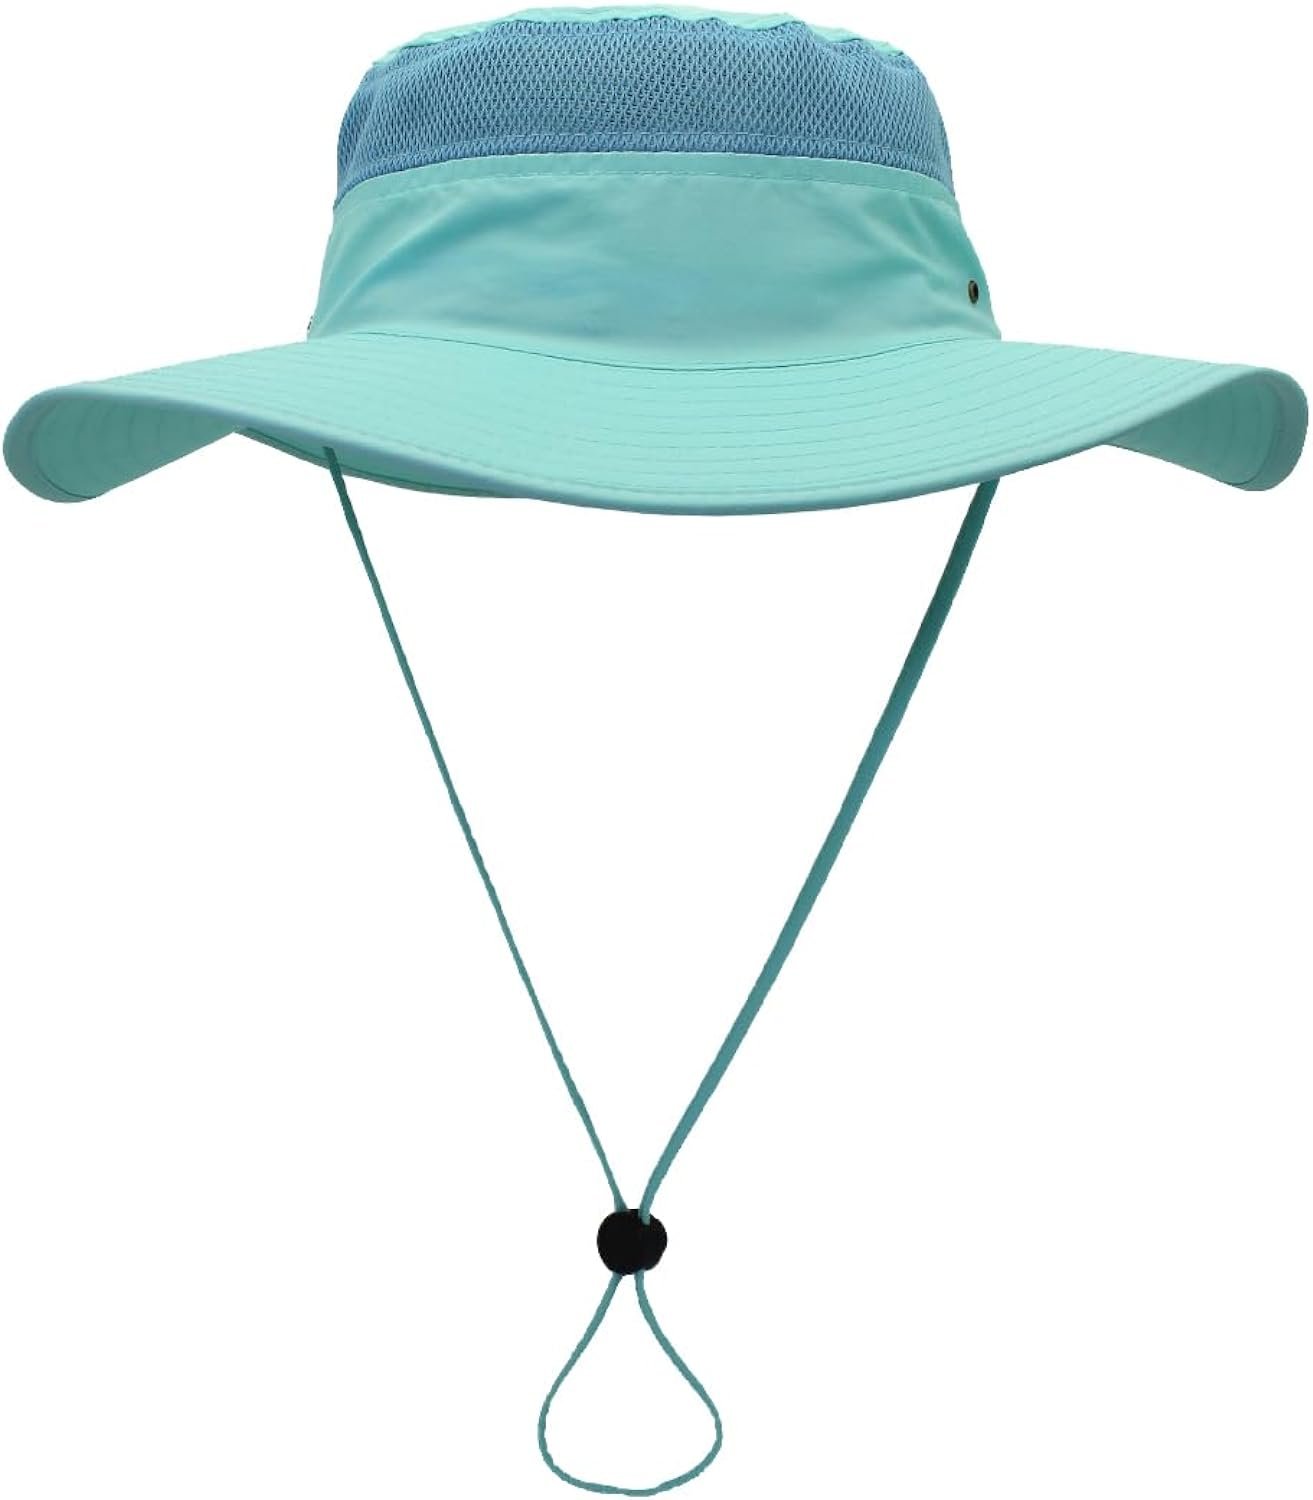 Wide Brim Sun Hat for Women and Men Summer Bucket Hats with UV Protection UPF 50+ for Fishing Hiking Beach Hats